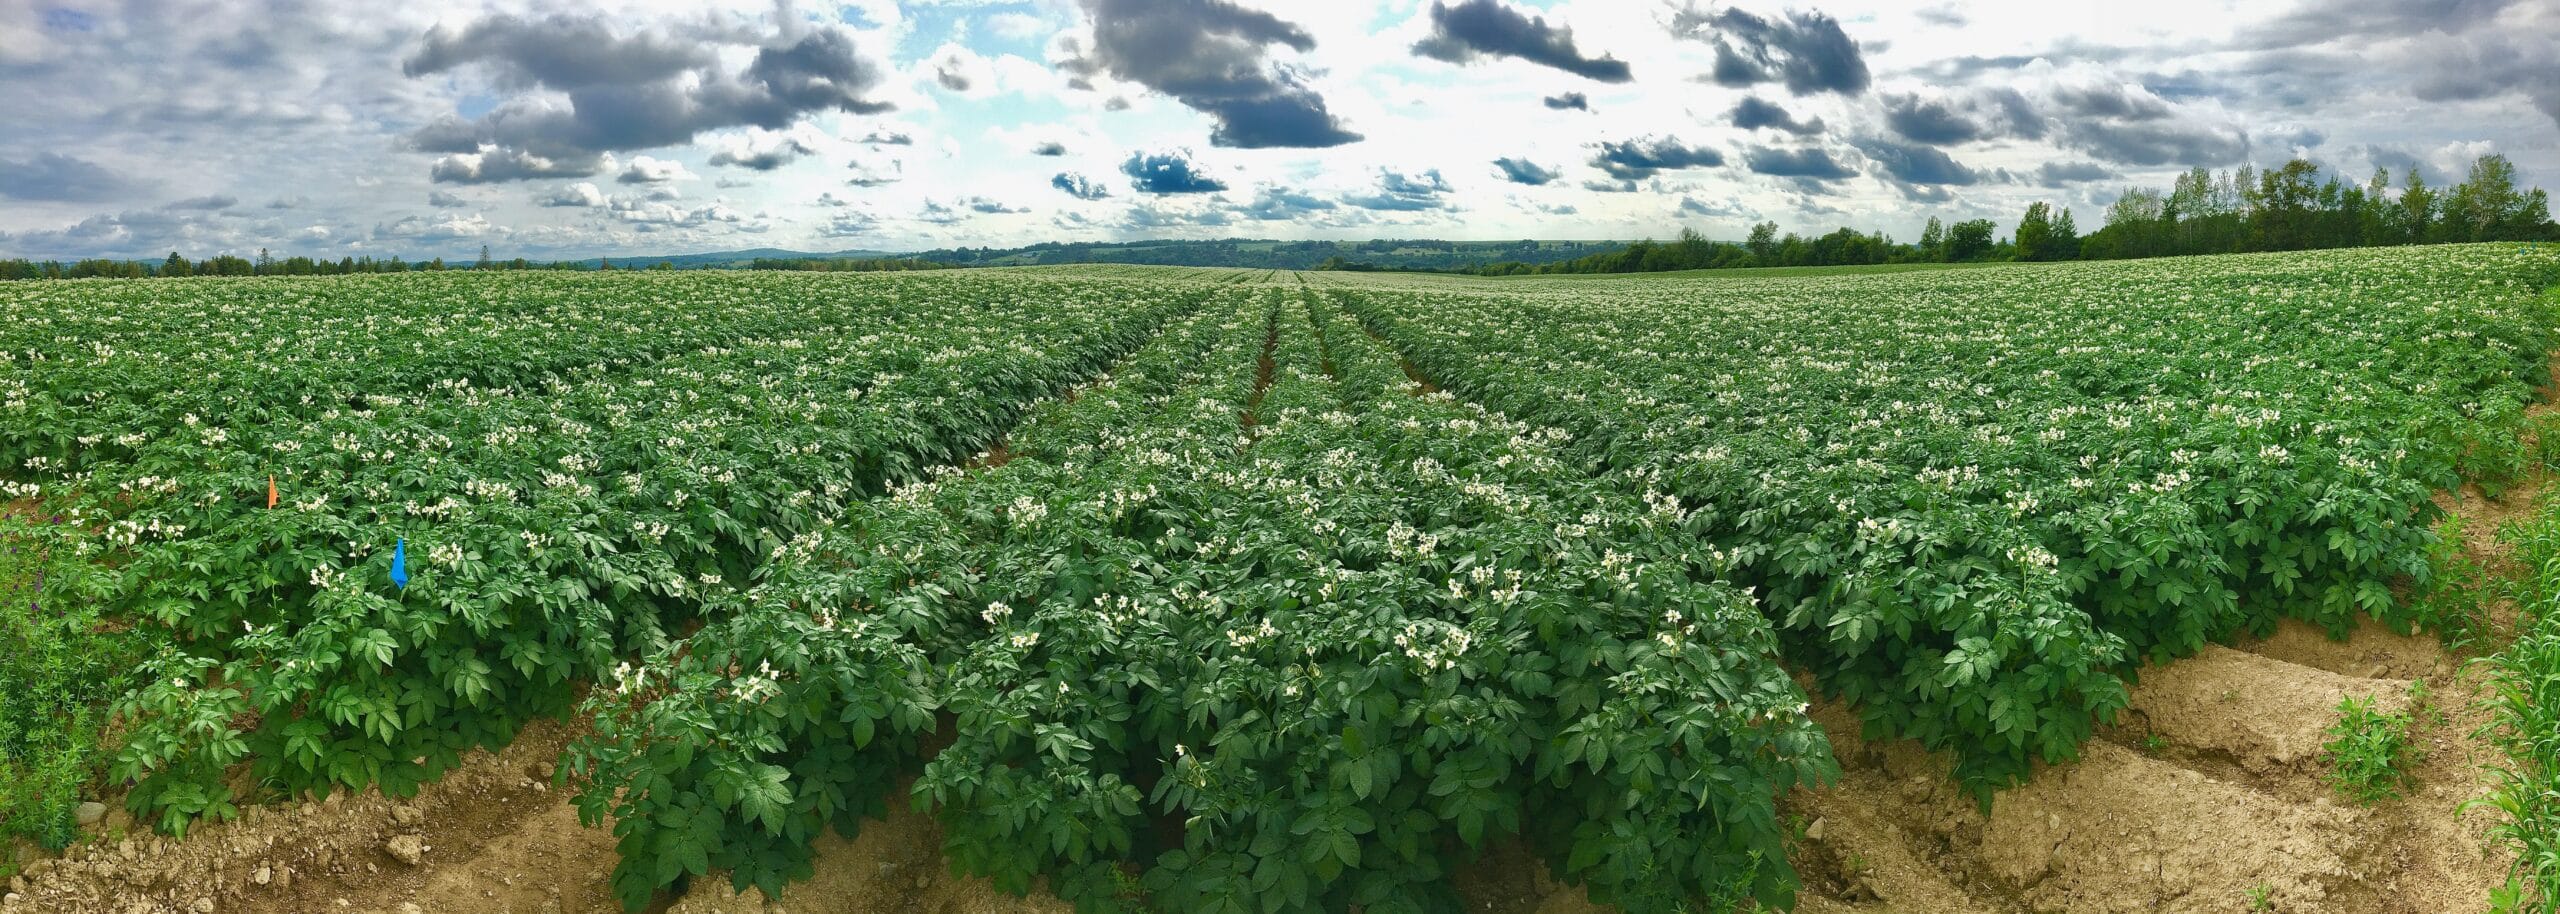 Flowering potato field at McCain Food’s Canadian Farm of the Future